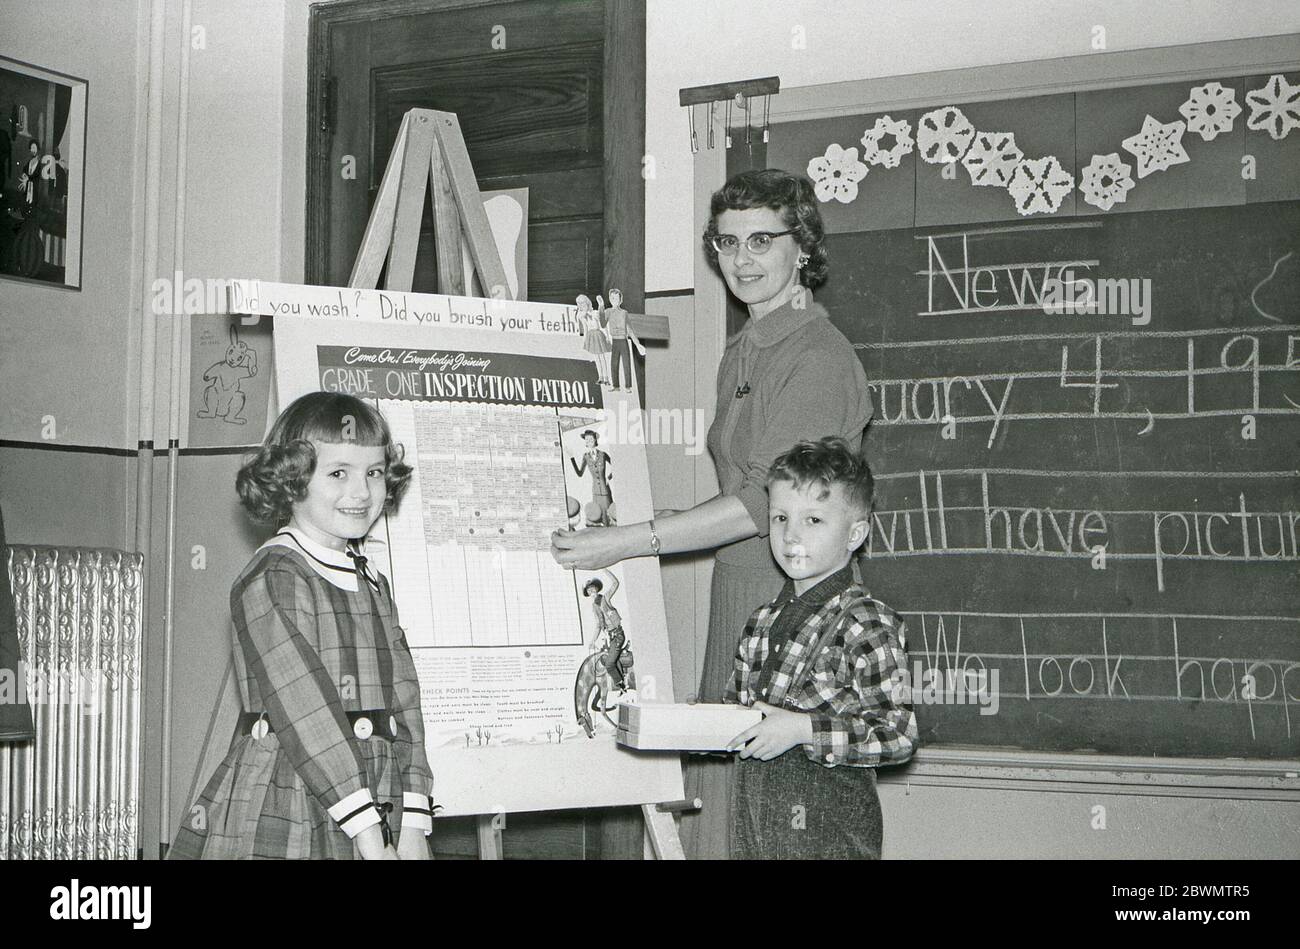 Education in the USA in the 1950s – in a classroom a teacher and two pupils are in front of a white-board with a chart concerning personal hygiene. The questions 'did you wash?' and 'did you brush your teeth?' are part of this scheme directed at grade one students in elementary school. There is hand-written news on the blackboard behind them. Stock Photo